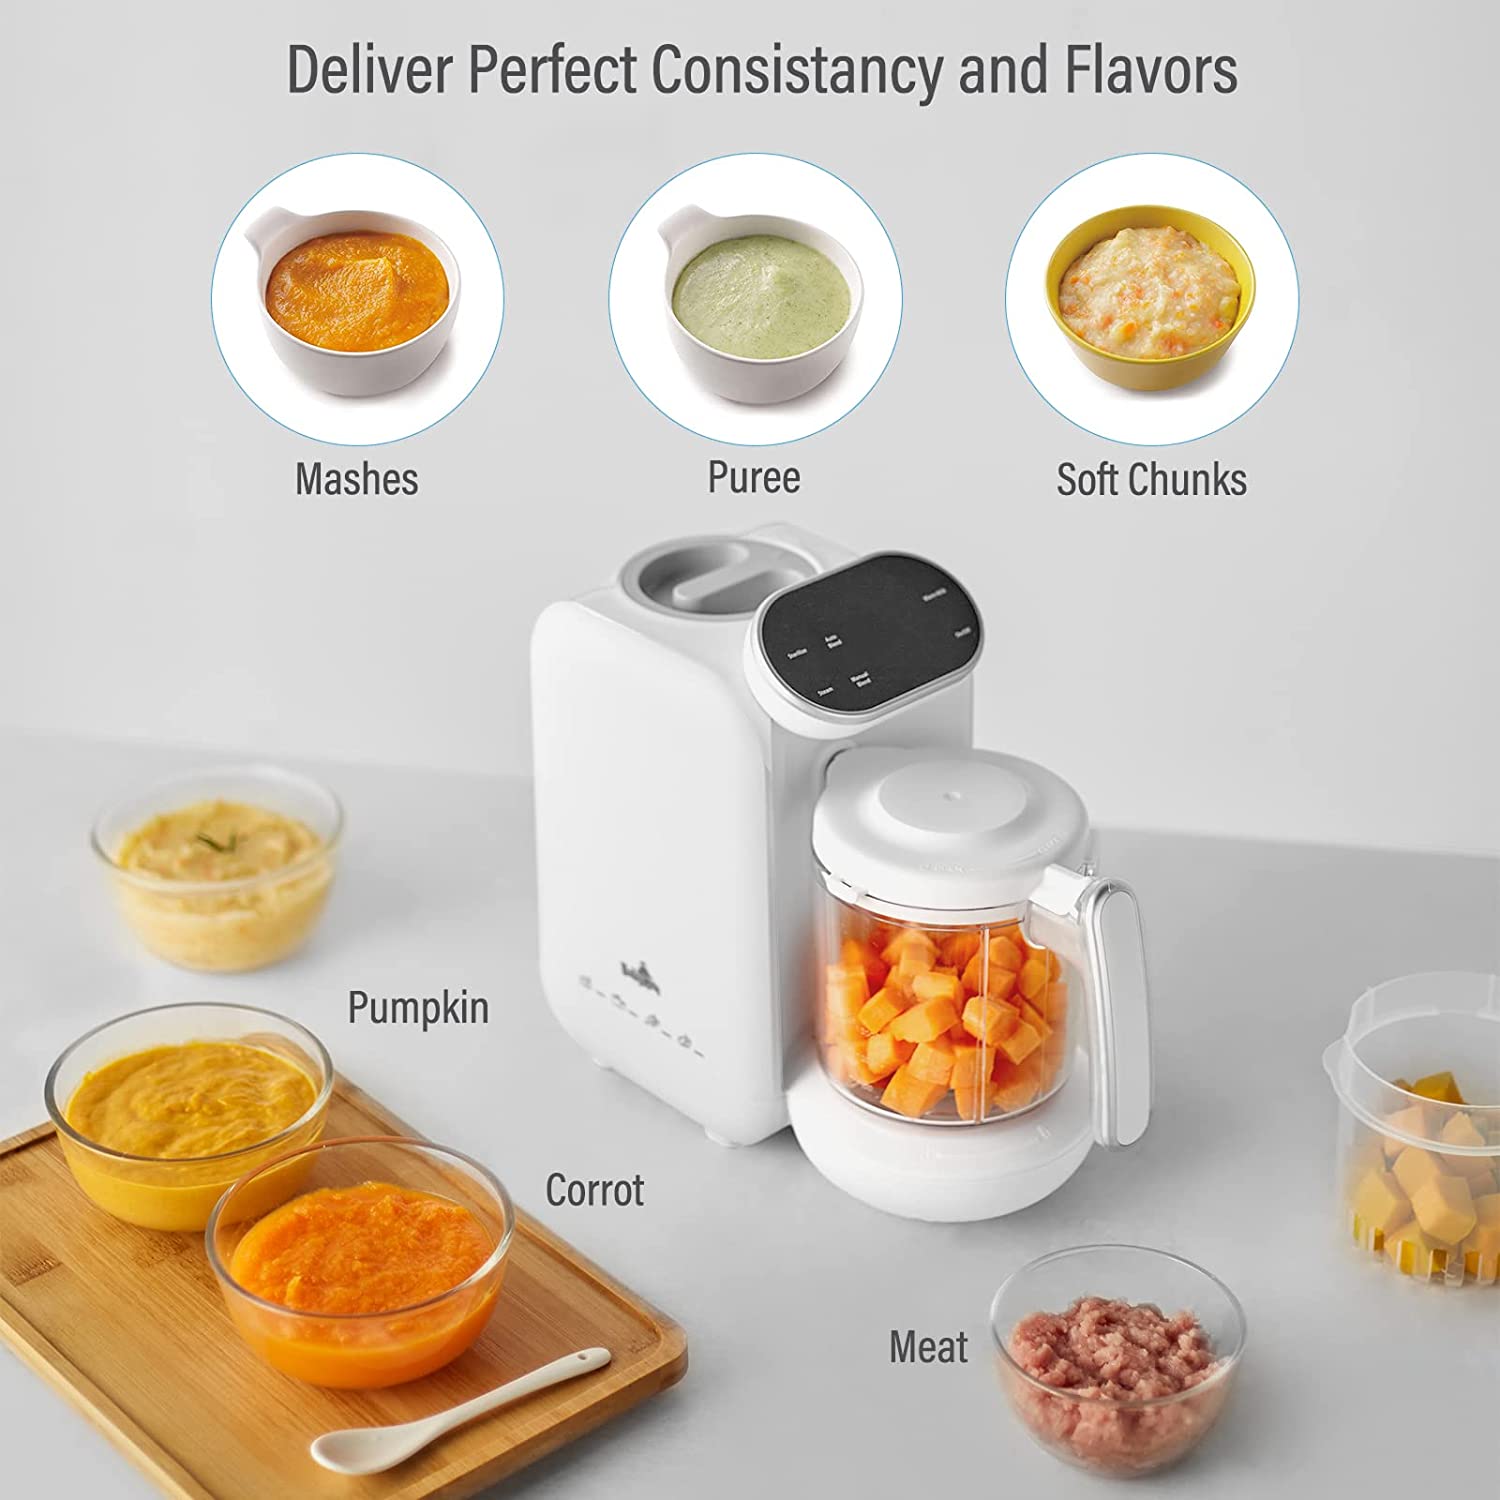 Baby Food Maker, 5 in 1 Baby Food Processor, Smart Control Multifunctional  Steamer Grinder with Stea 